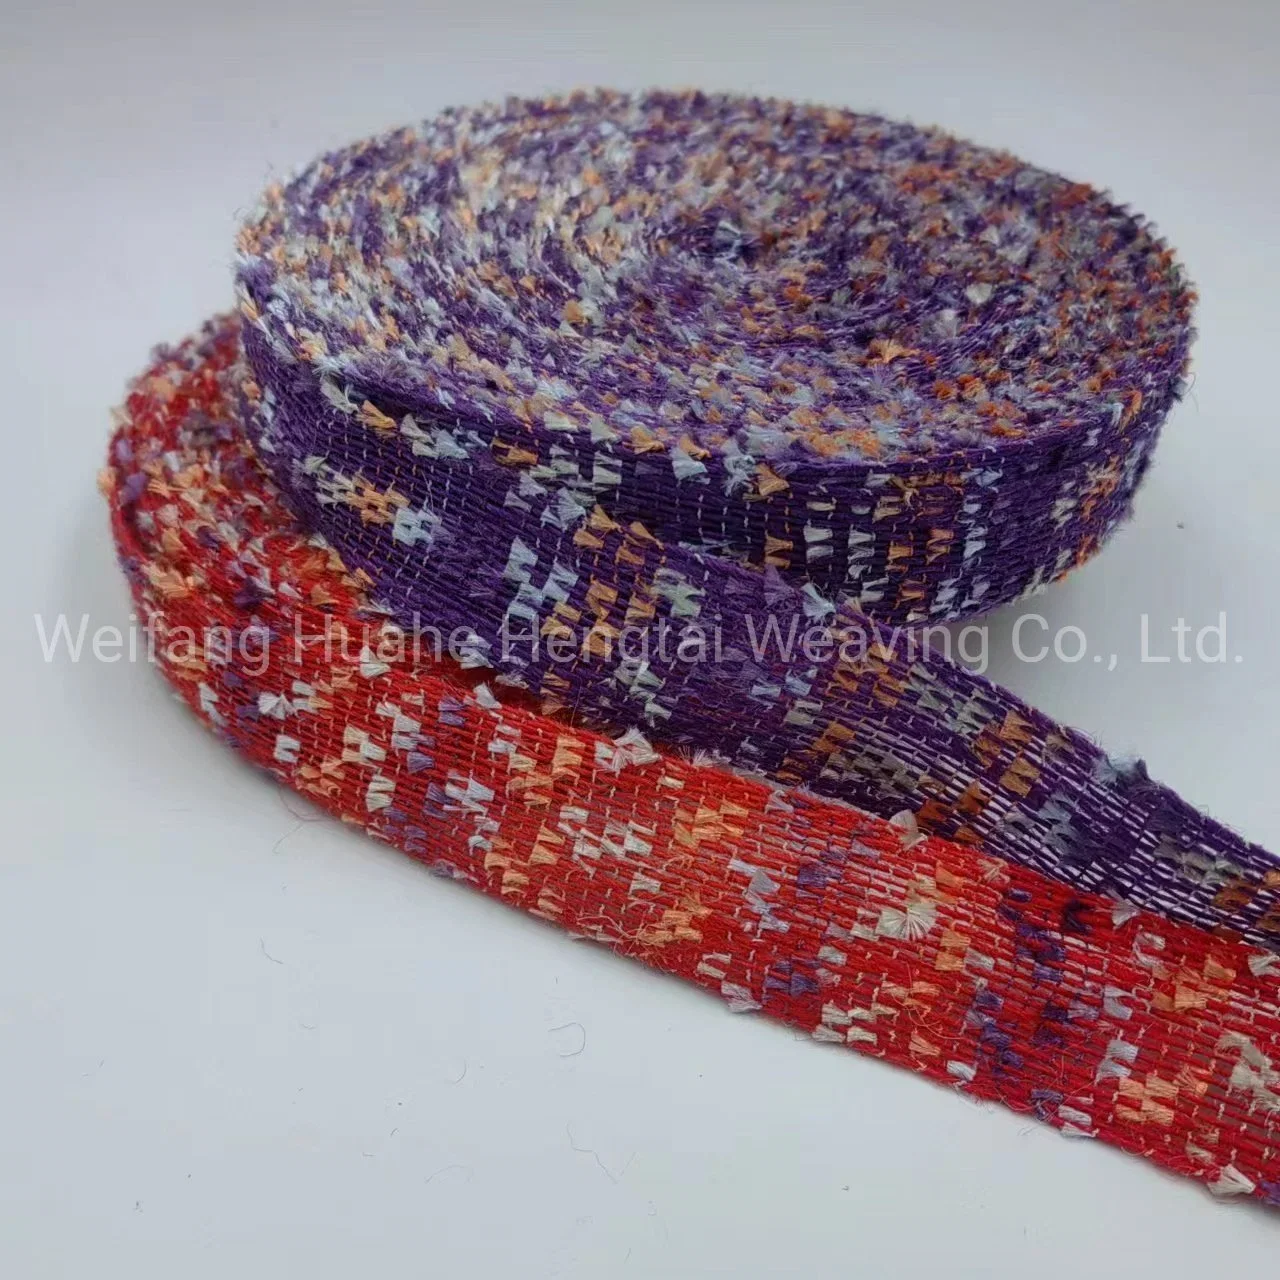 New Colorful Woven Ribbon Clothing Accessories Lace Hemp Strap